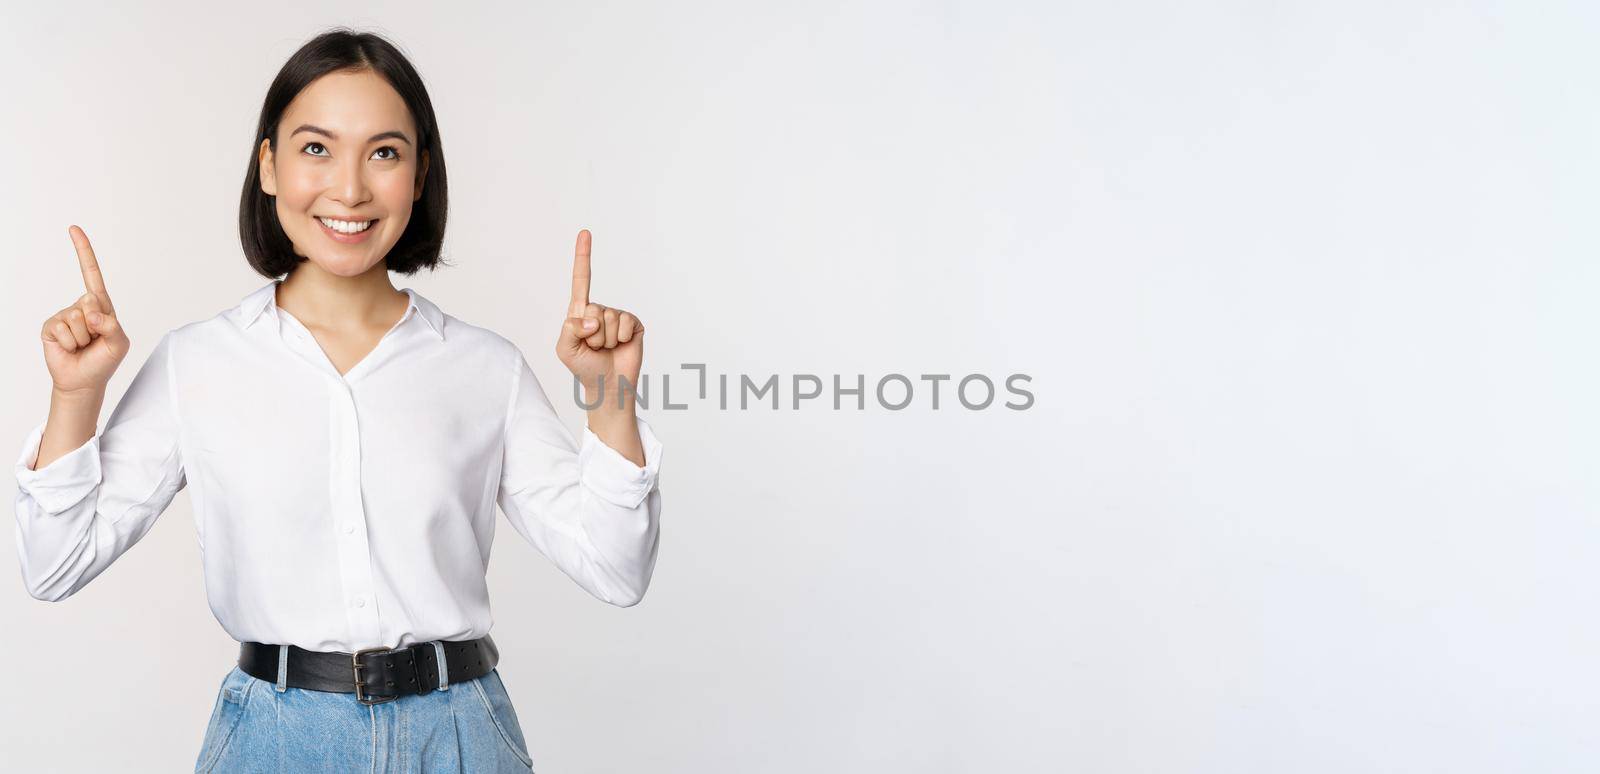 Enthusiastic asian business woman pointing, looking up with happy smiling face, showing company logo or banner, standing over white background.